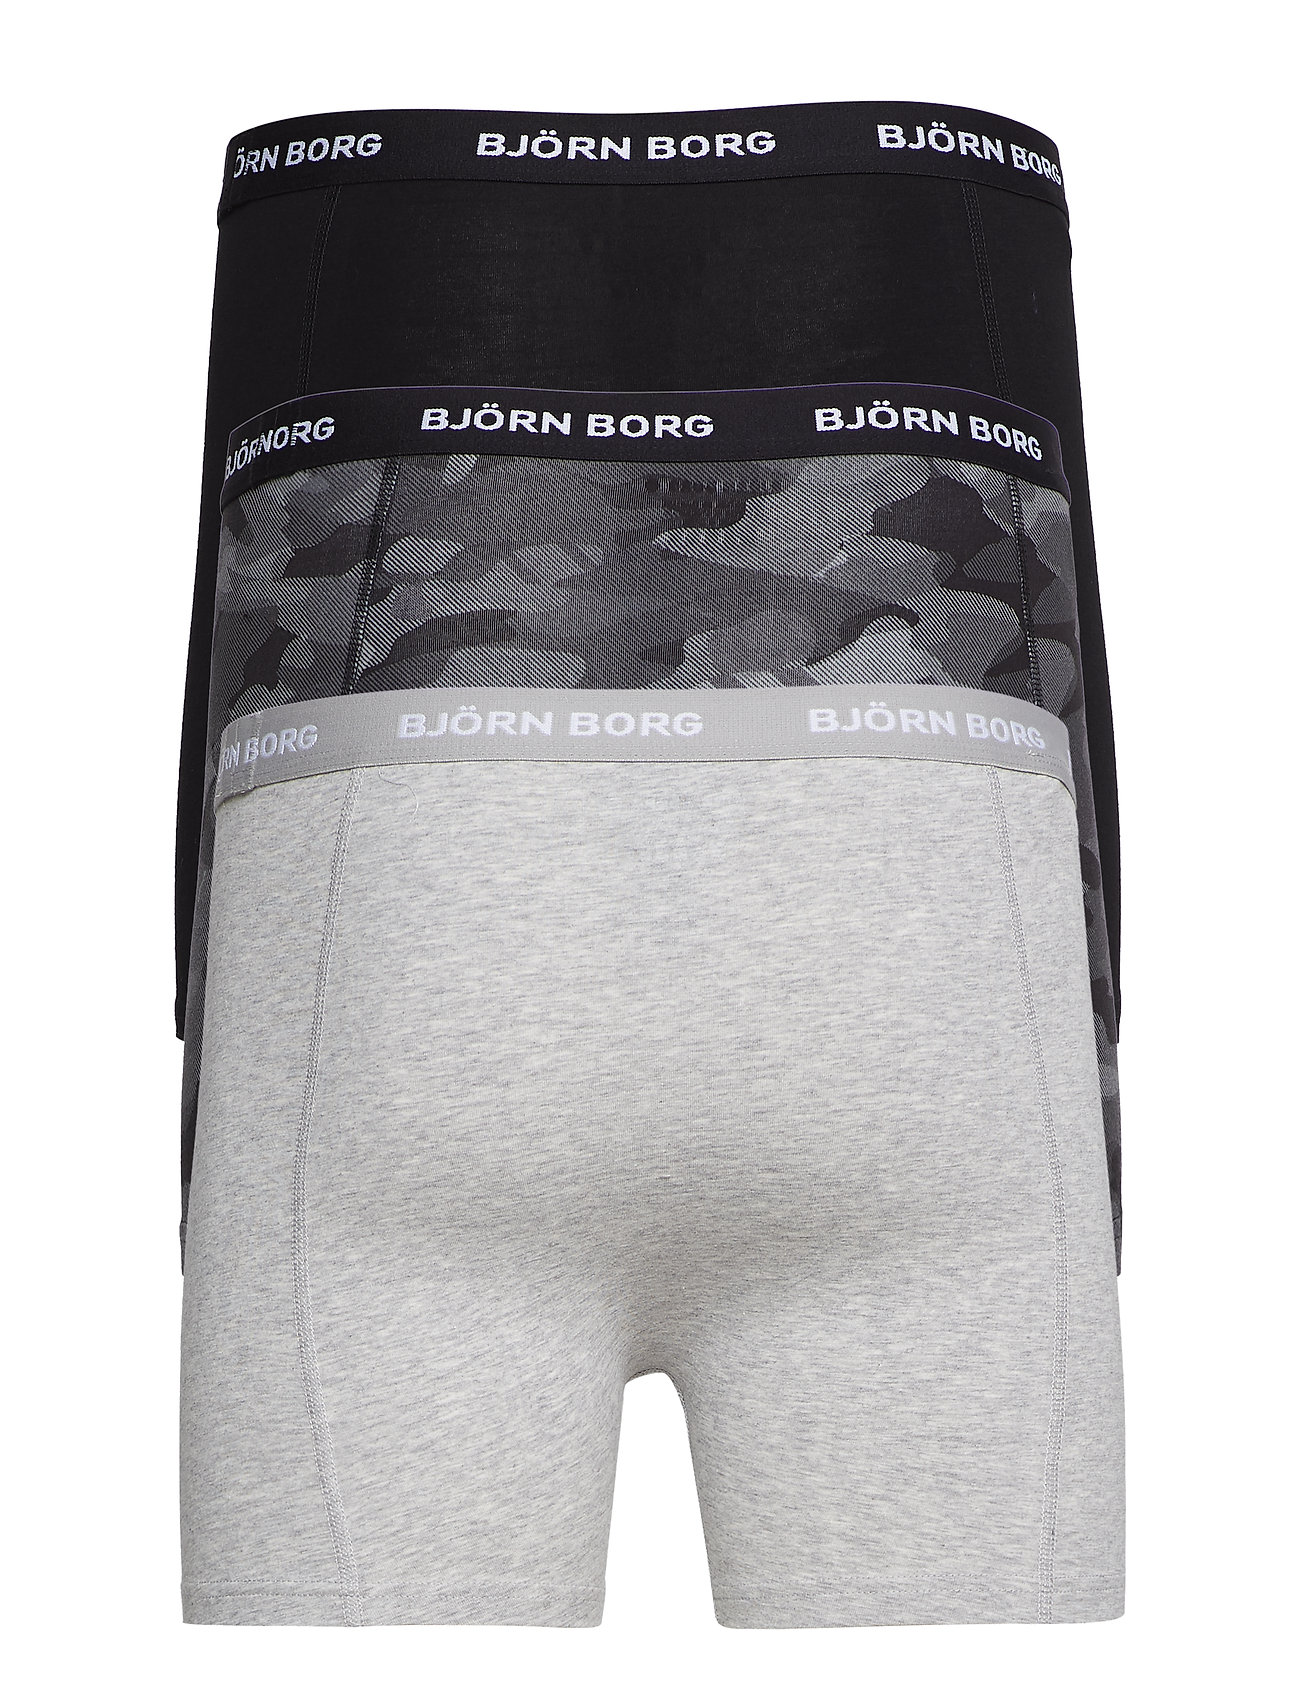 Björn Borg - COTTON STRETCH BOXER 3p - lowest prices - multipack 2 - 1